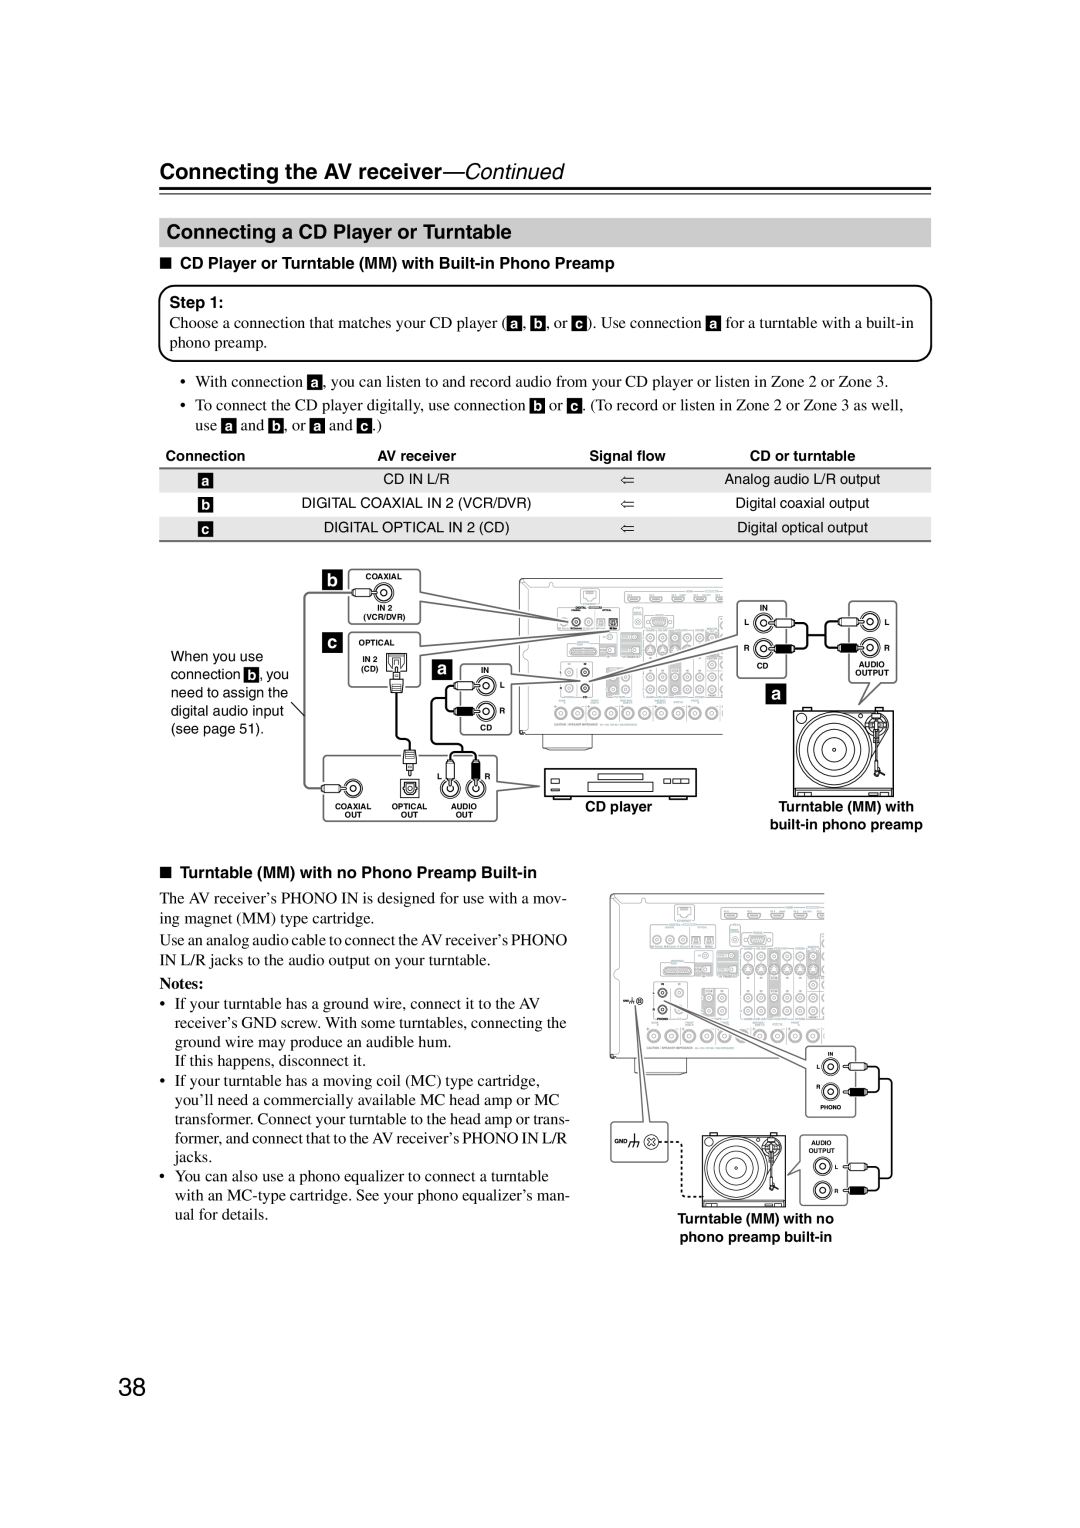 Onkyo TX-NR1007 instruction manual Connecting a CD Player or Turntable, Connecting the AV receiver—Continued, Step, Notes 